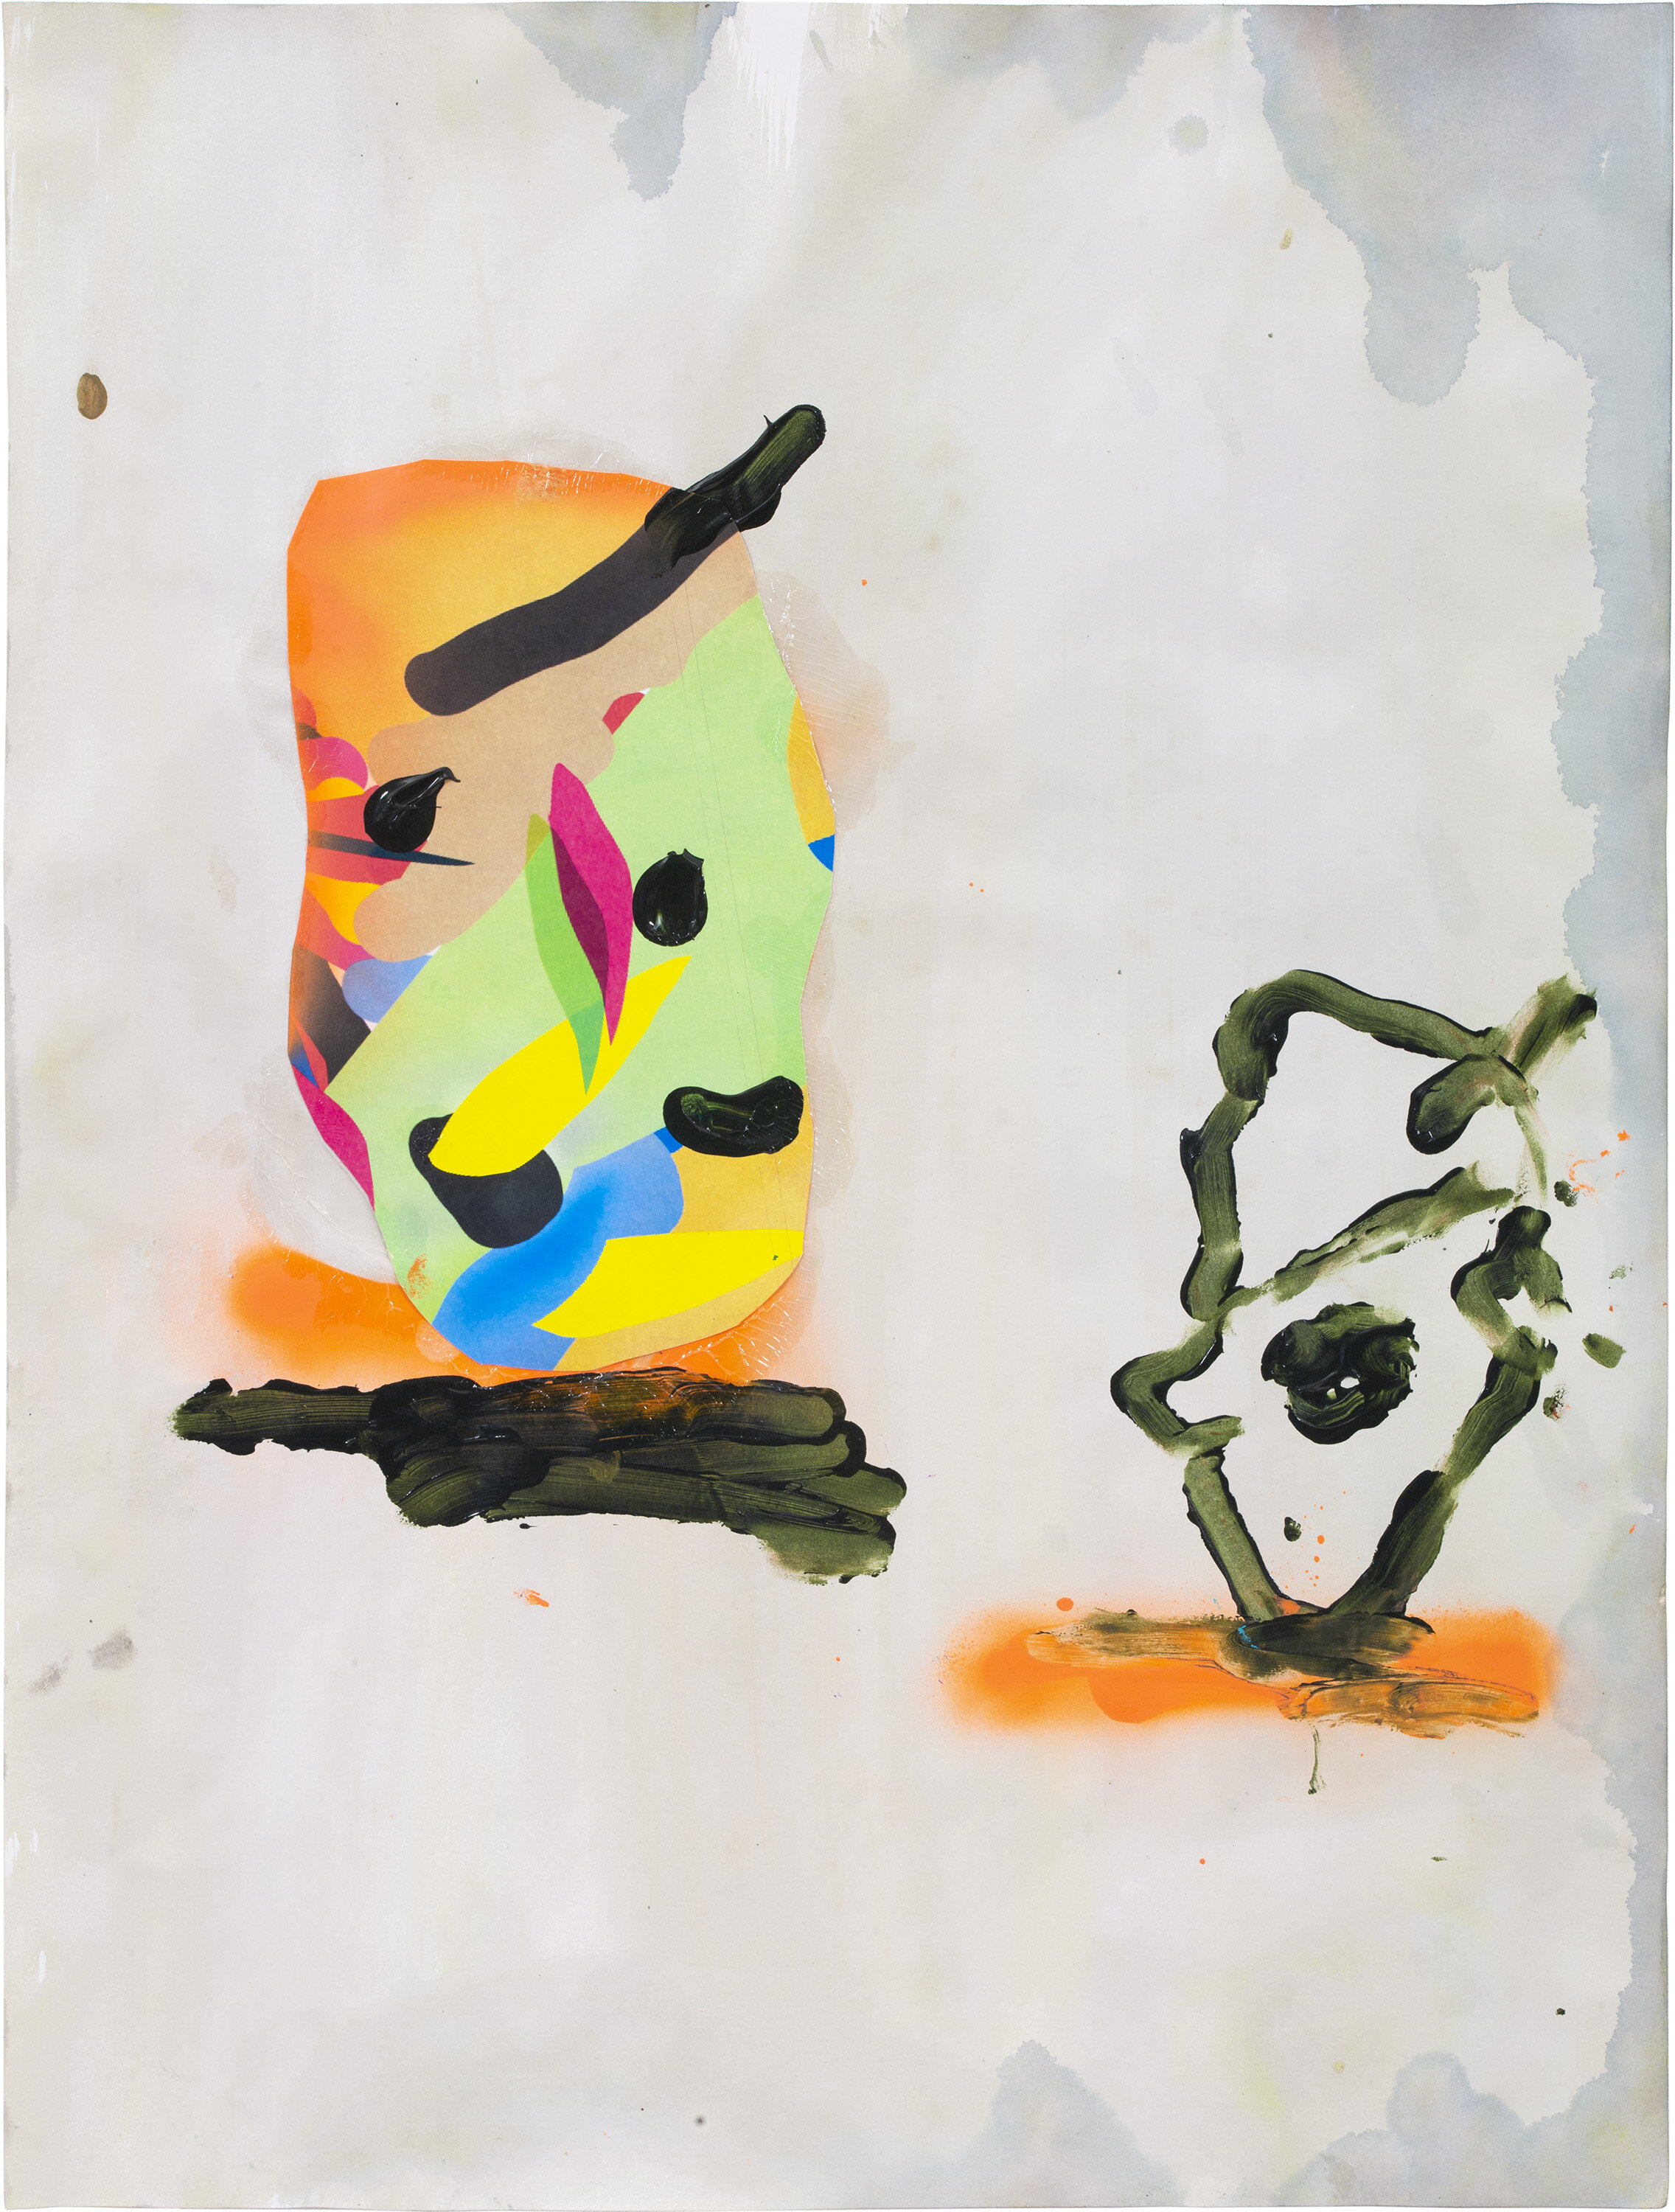  Drew Beattie and Ben Shepard   DBBS-DRW-2019-013   2019 acrylic, spray paint and collage on paper  24 x 18 inches 